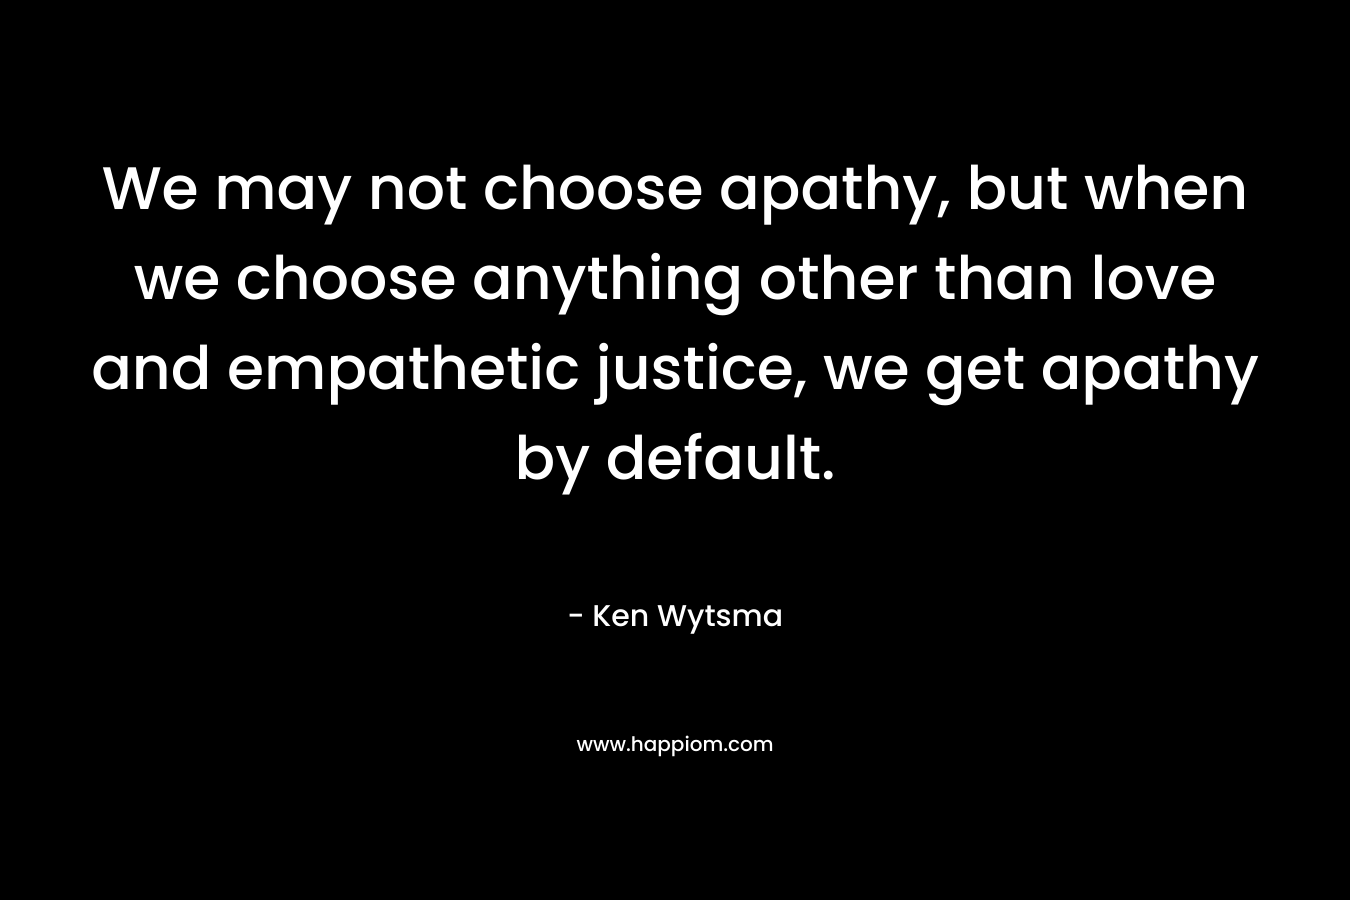 We may not choose apathy, but when we choose anything other than love and empathetic justice, we get apathy by default. – Ken Wytsma